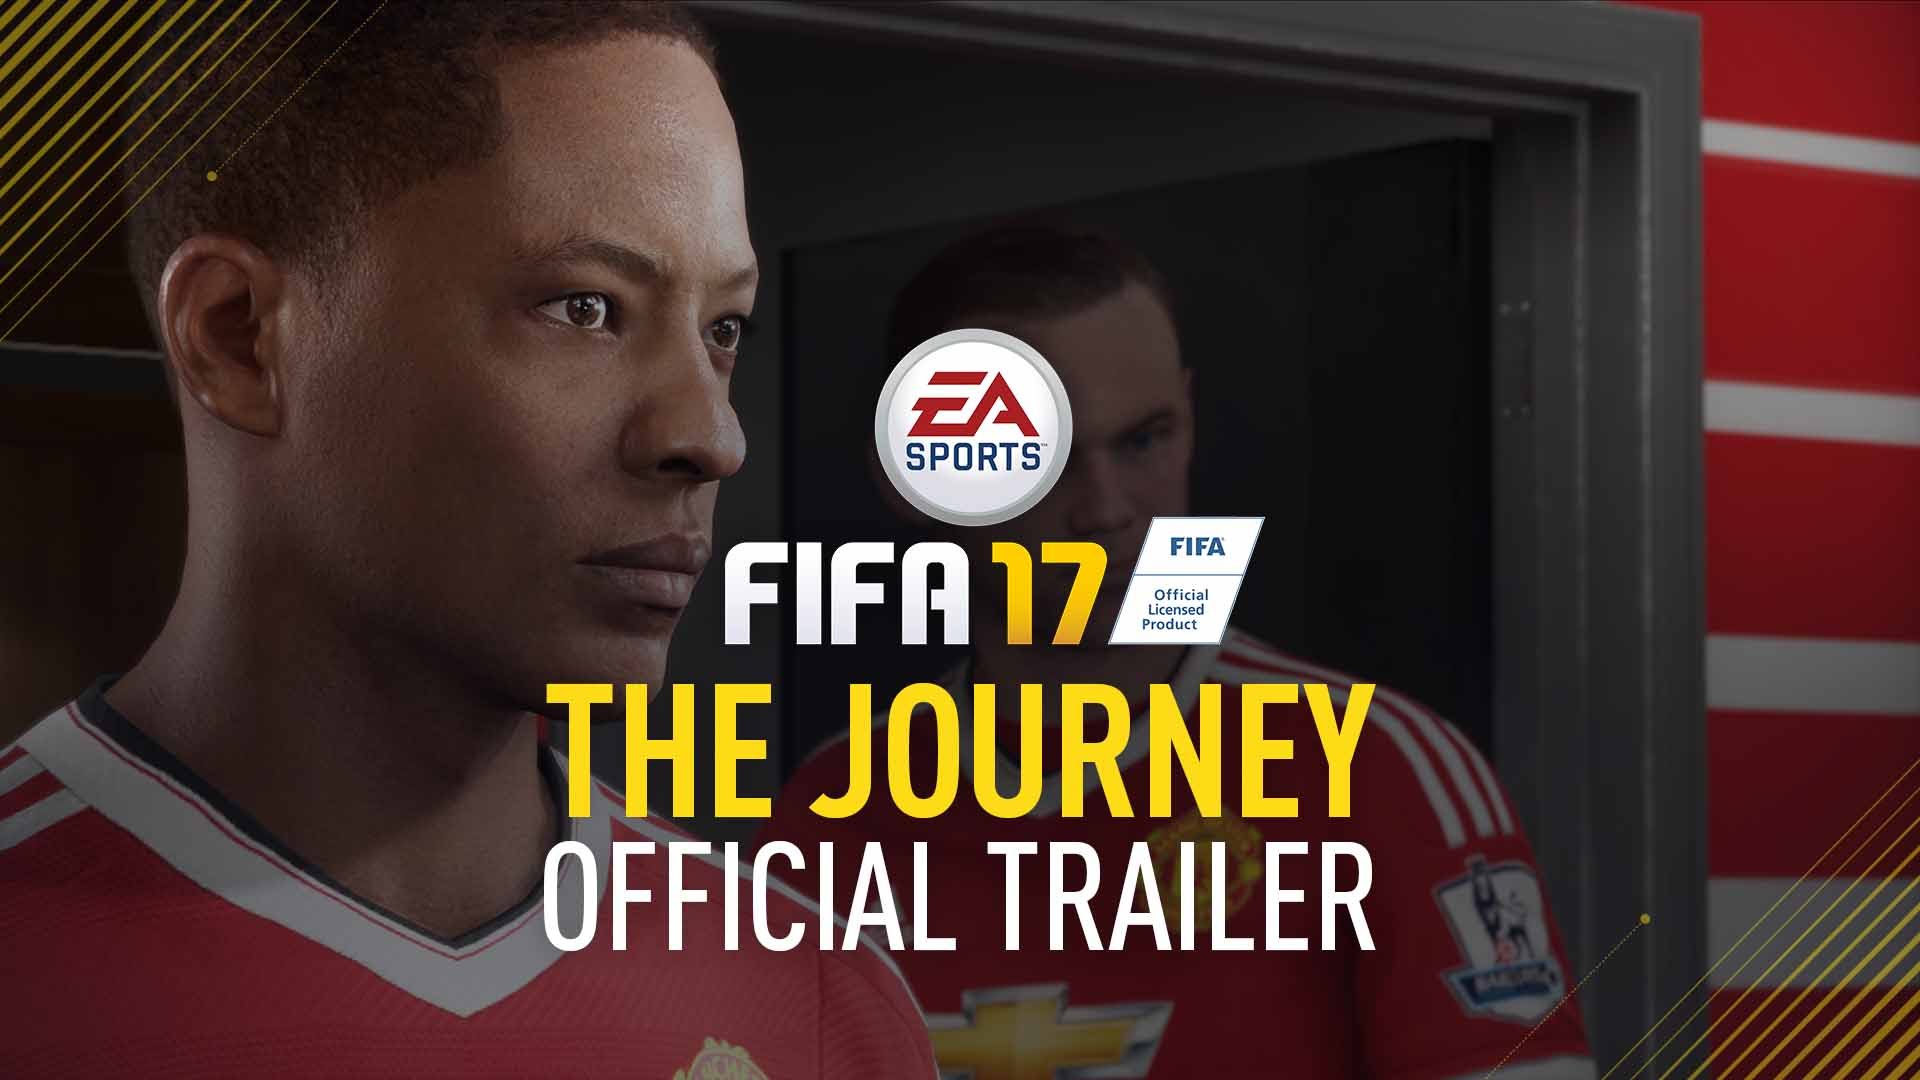 Fifa 17 Official Trailer The Journey